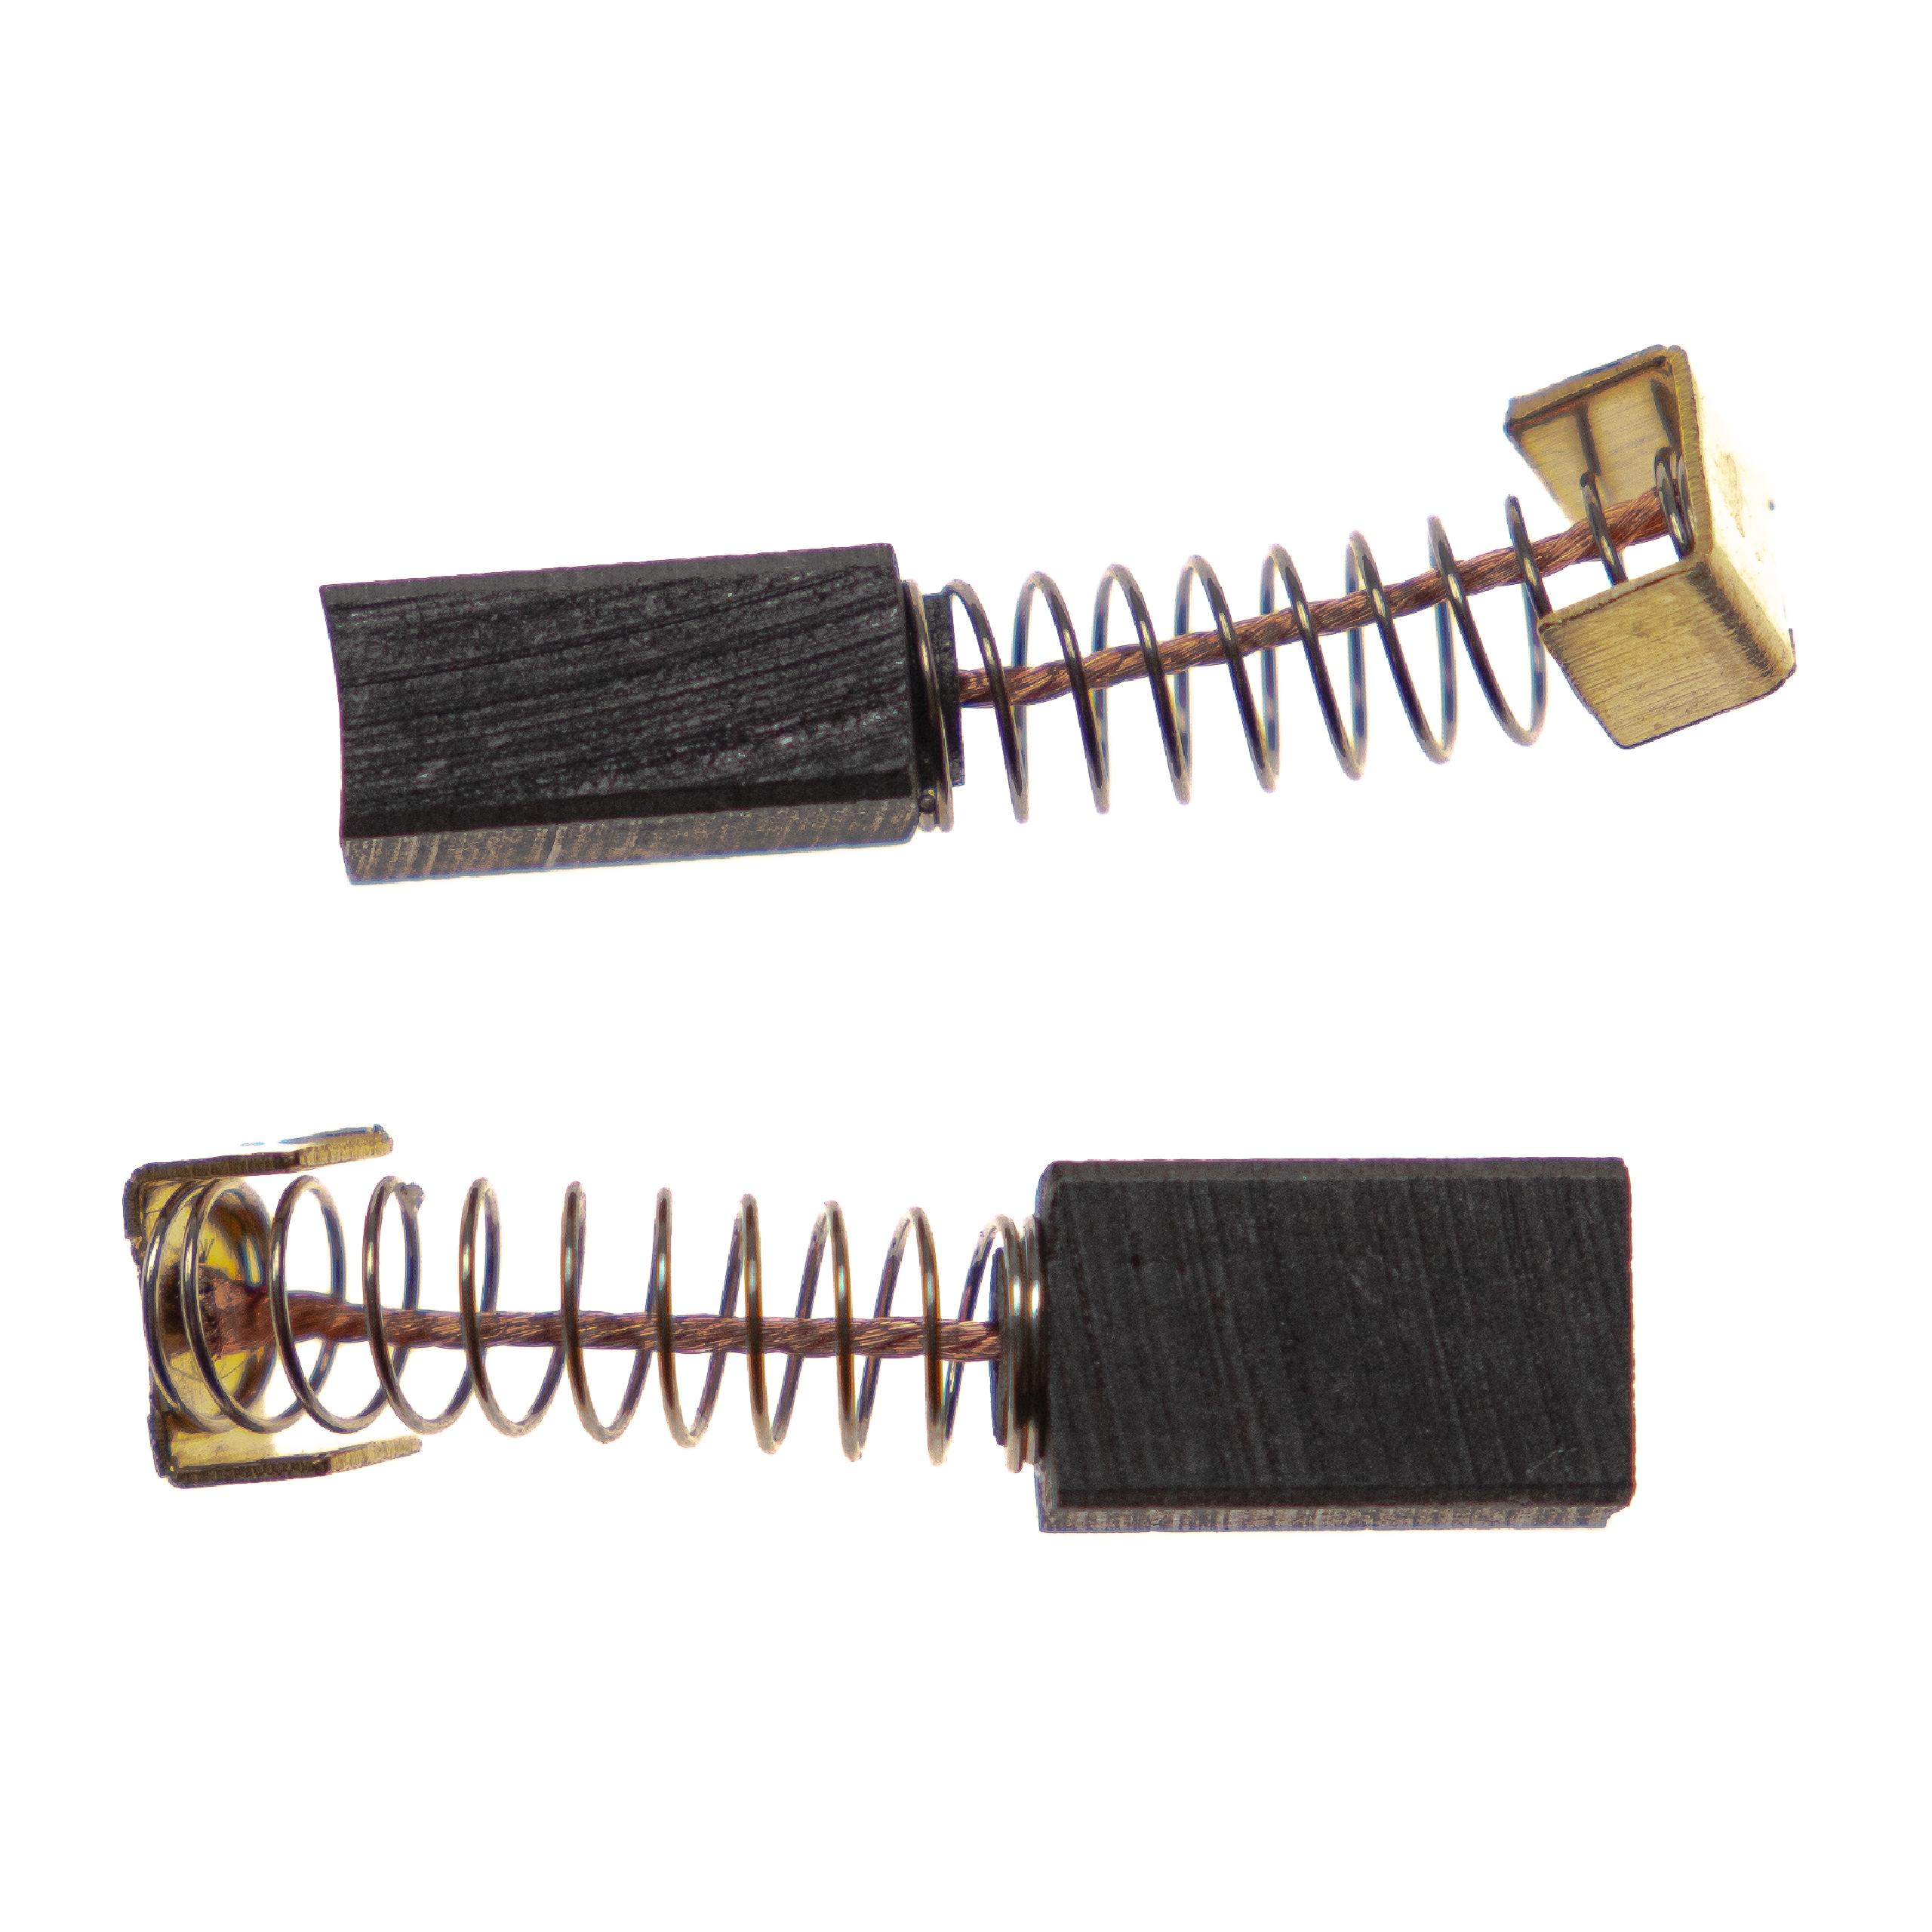 2x Carbon Brush as Replacement for Dremel 02-095, 2-615-296-770 Electric Power Tools + Spring, 14 x 8 x 6mm